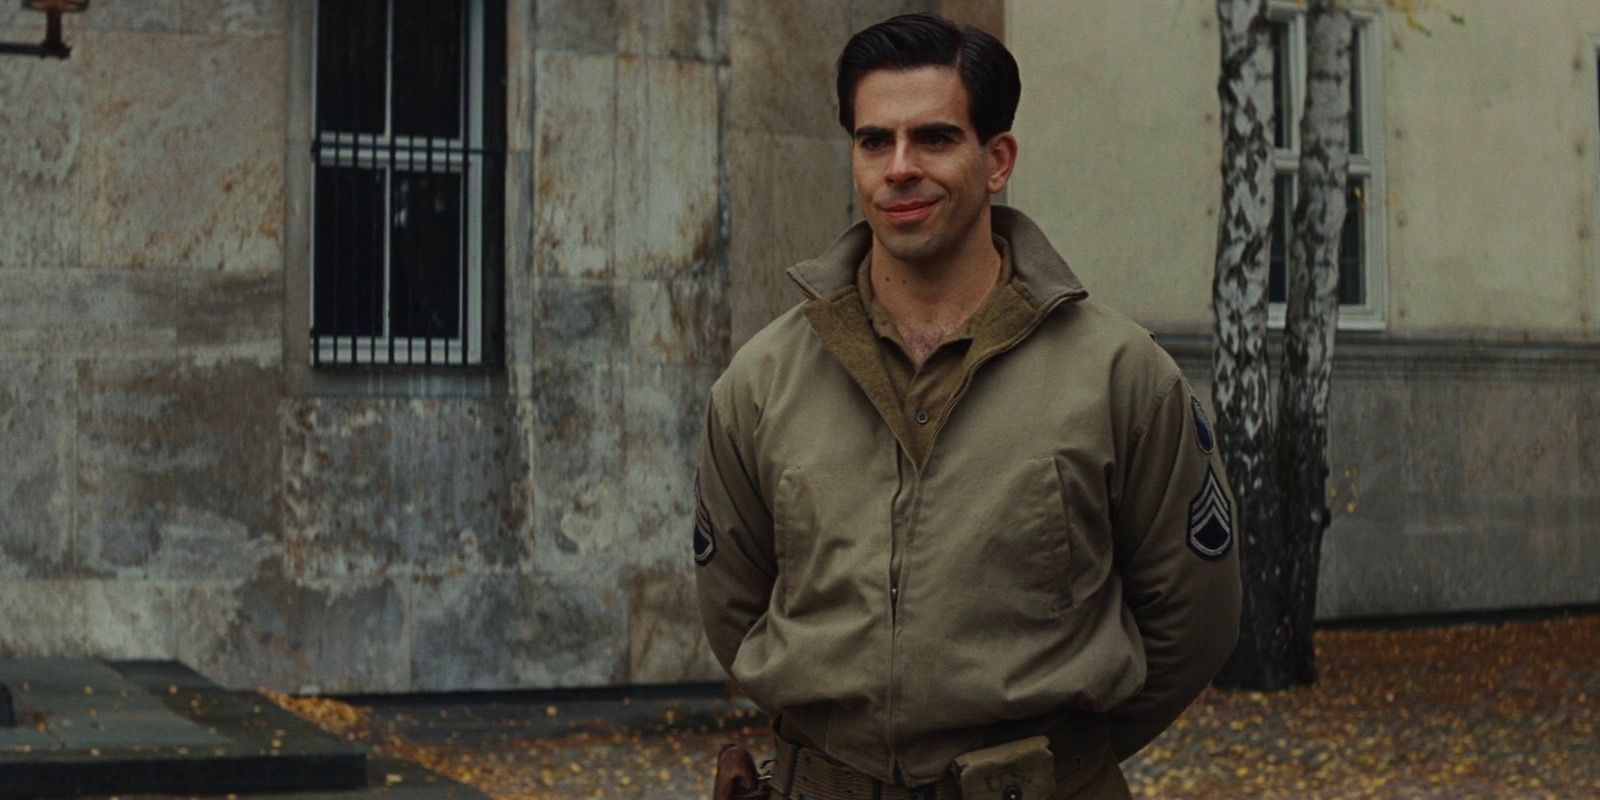 Eli Roth as Sgt. Donny Donowitz in Inglourious Basterds